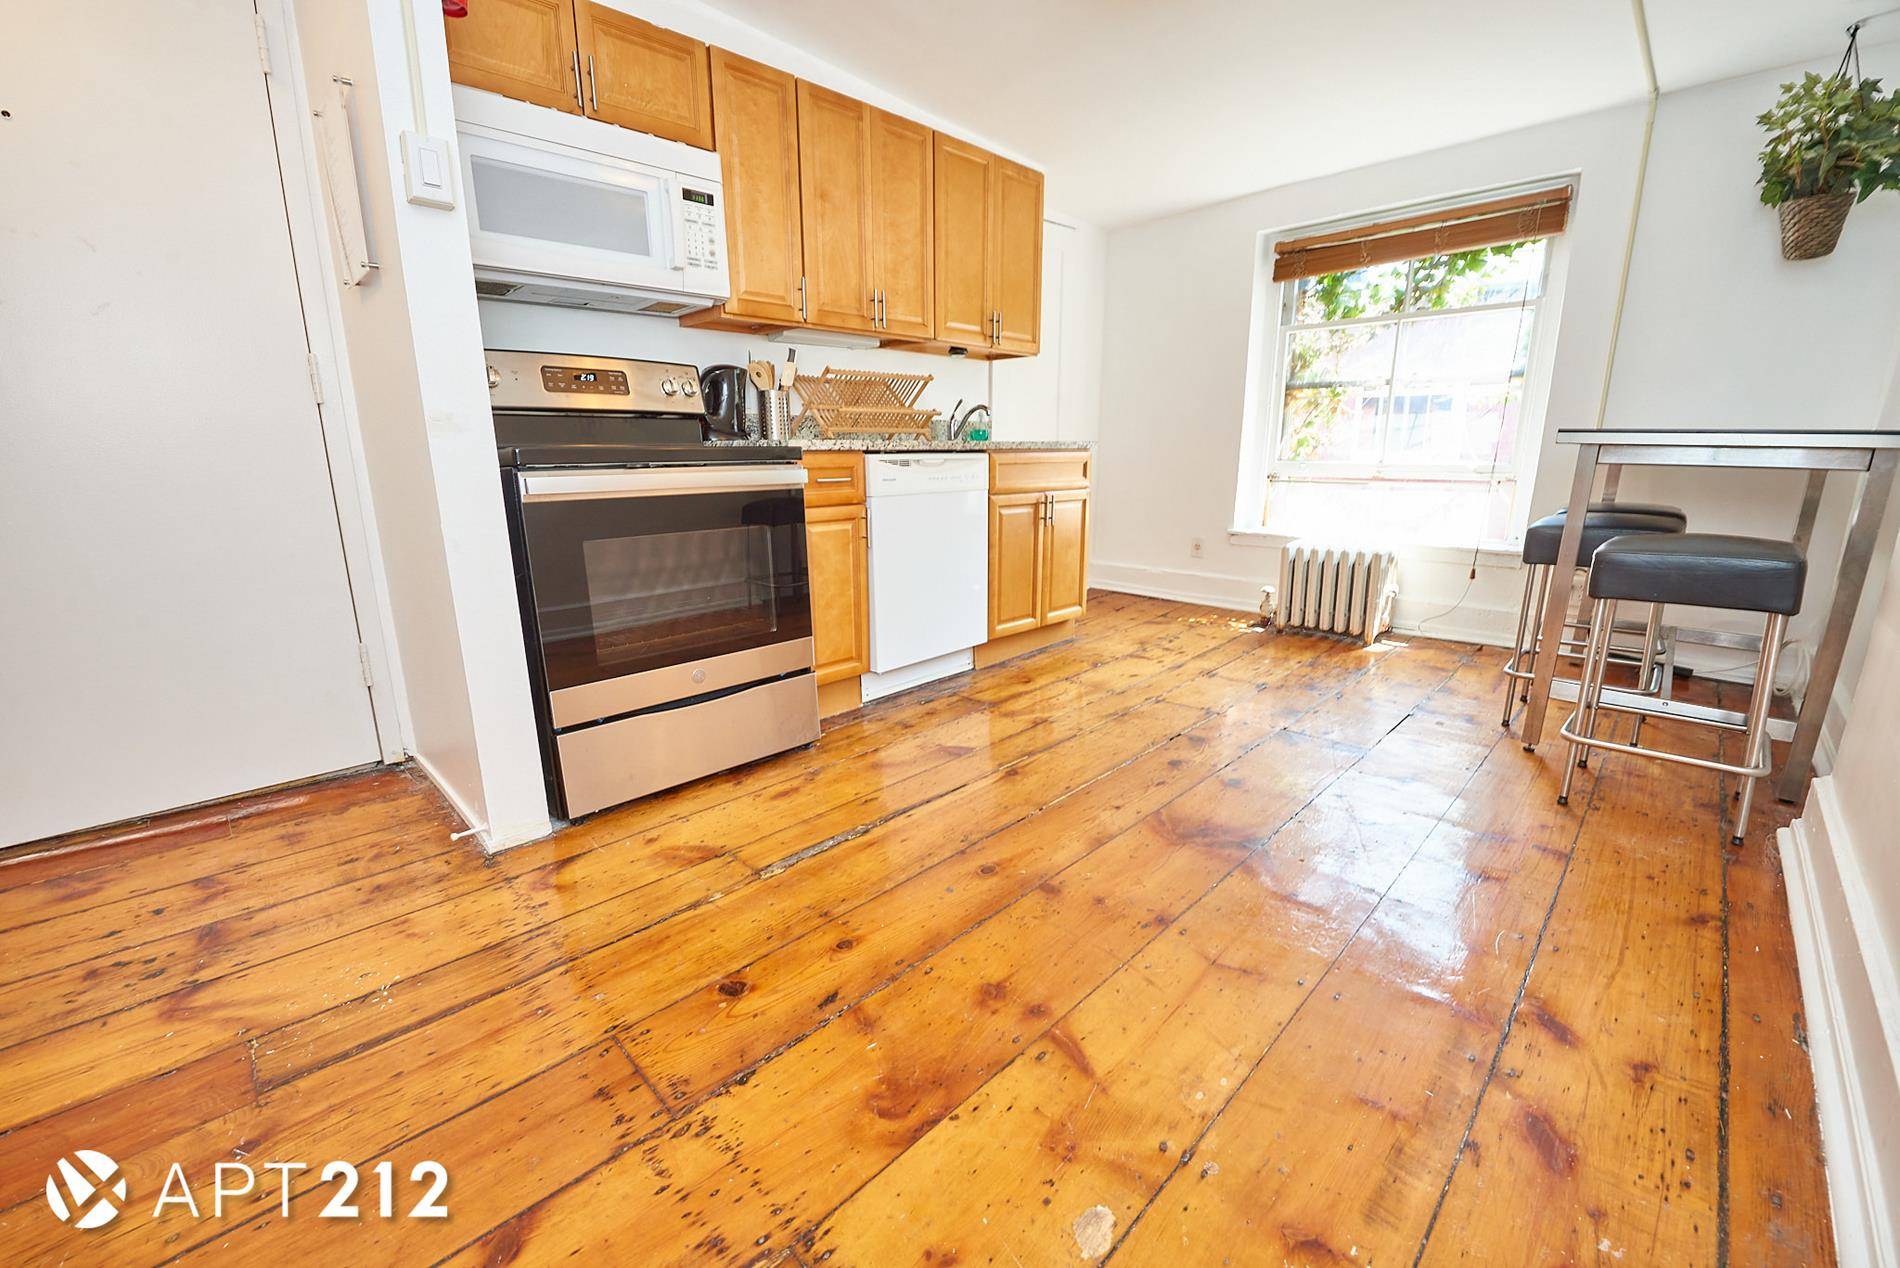 Fully furnished spacious 3 bedroomsLocated in the heart of Little Italy Chinatown, Mulberry corner of Hester St !